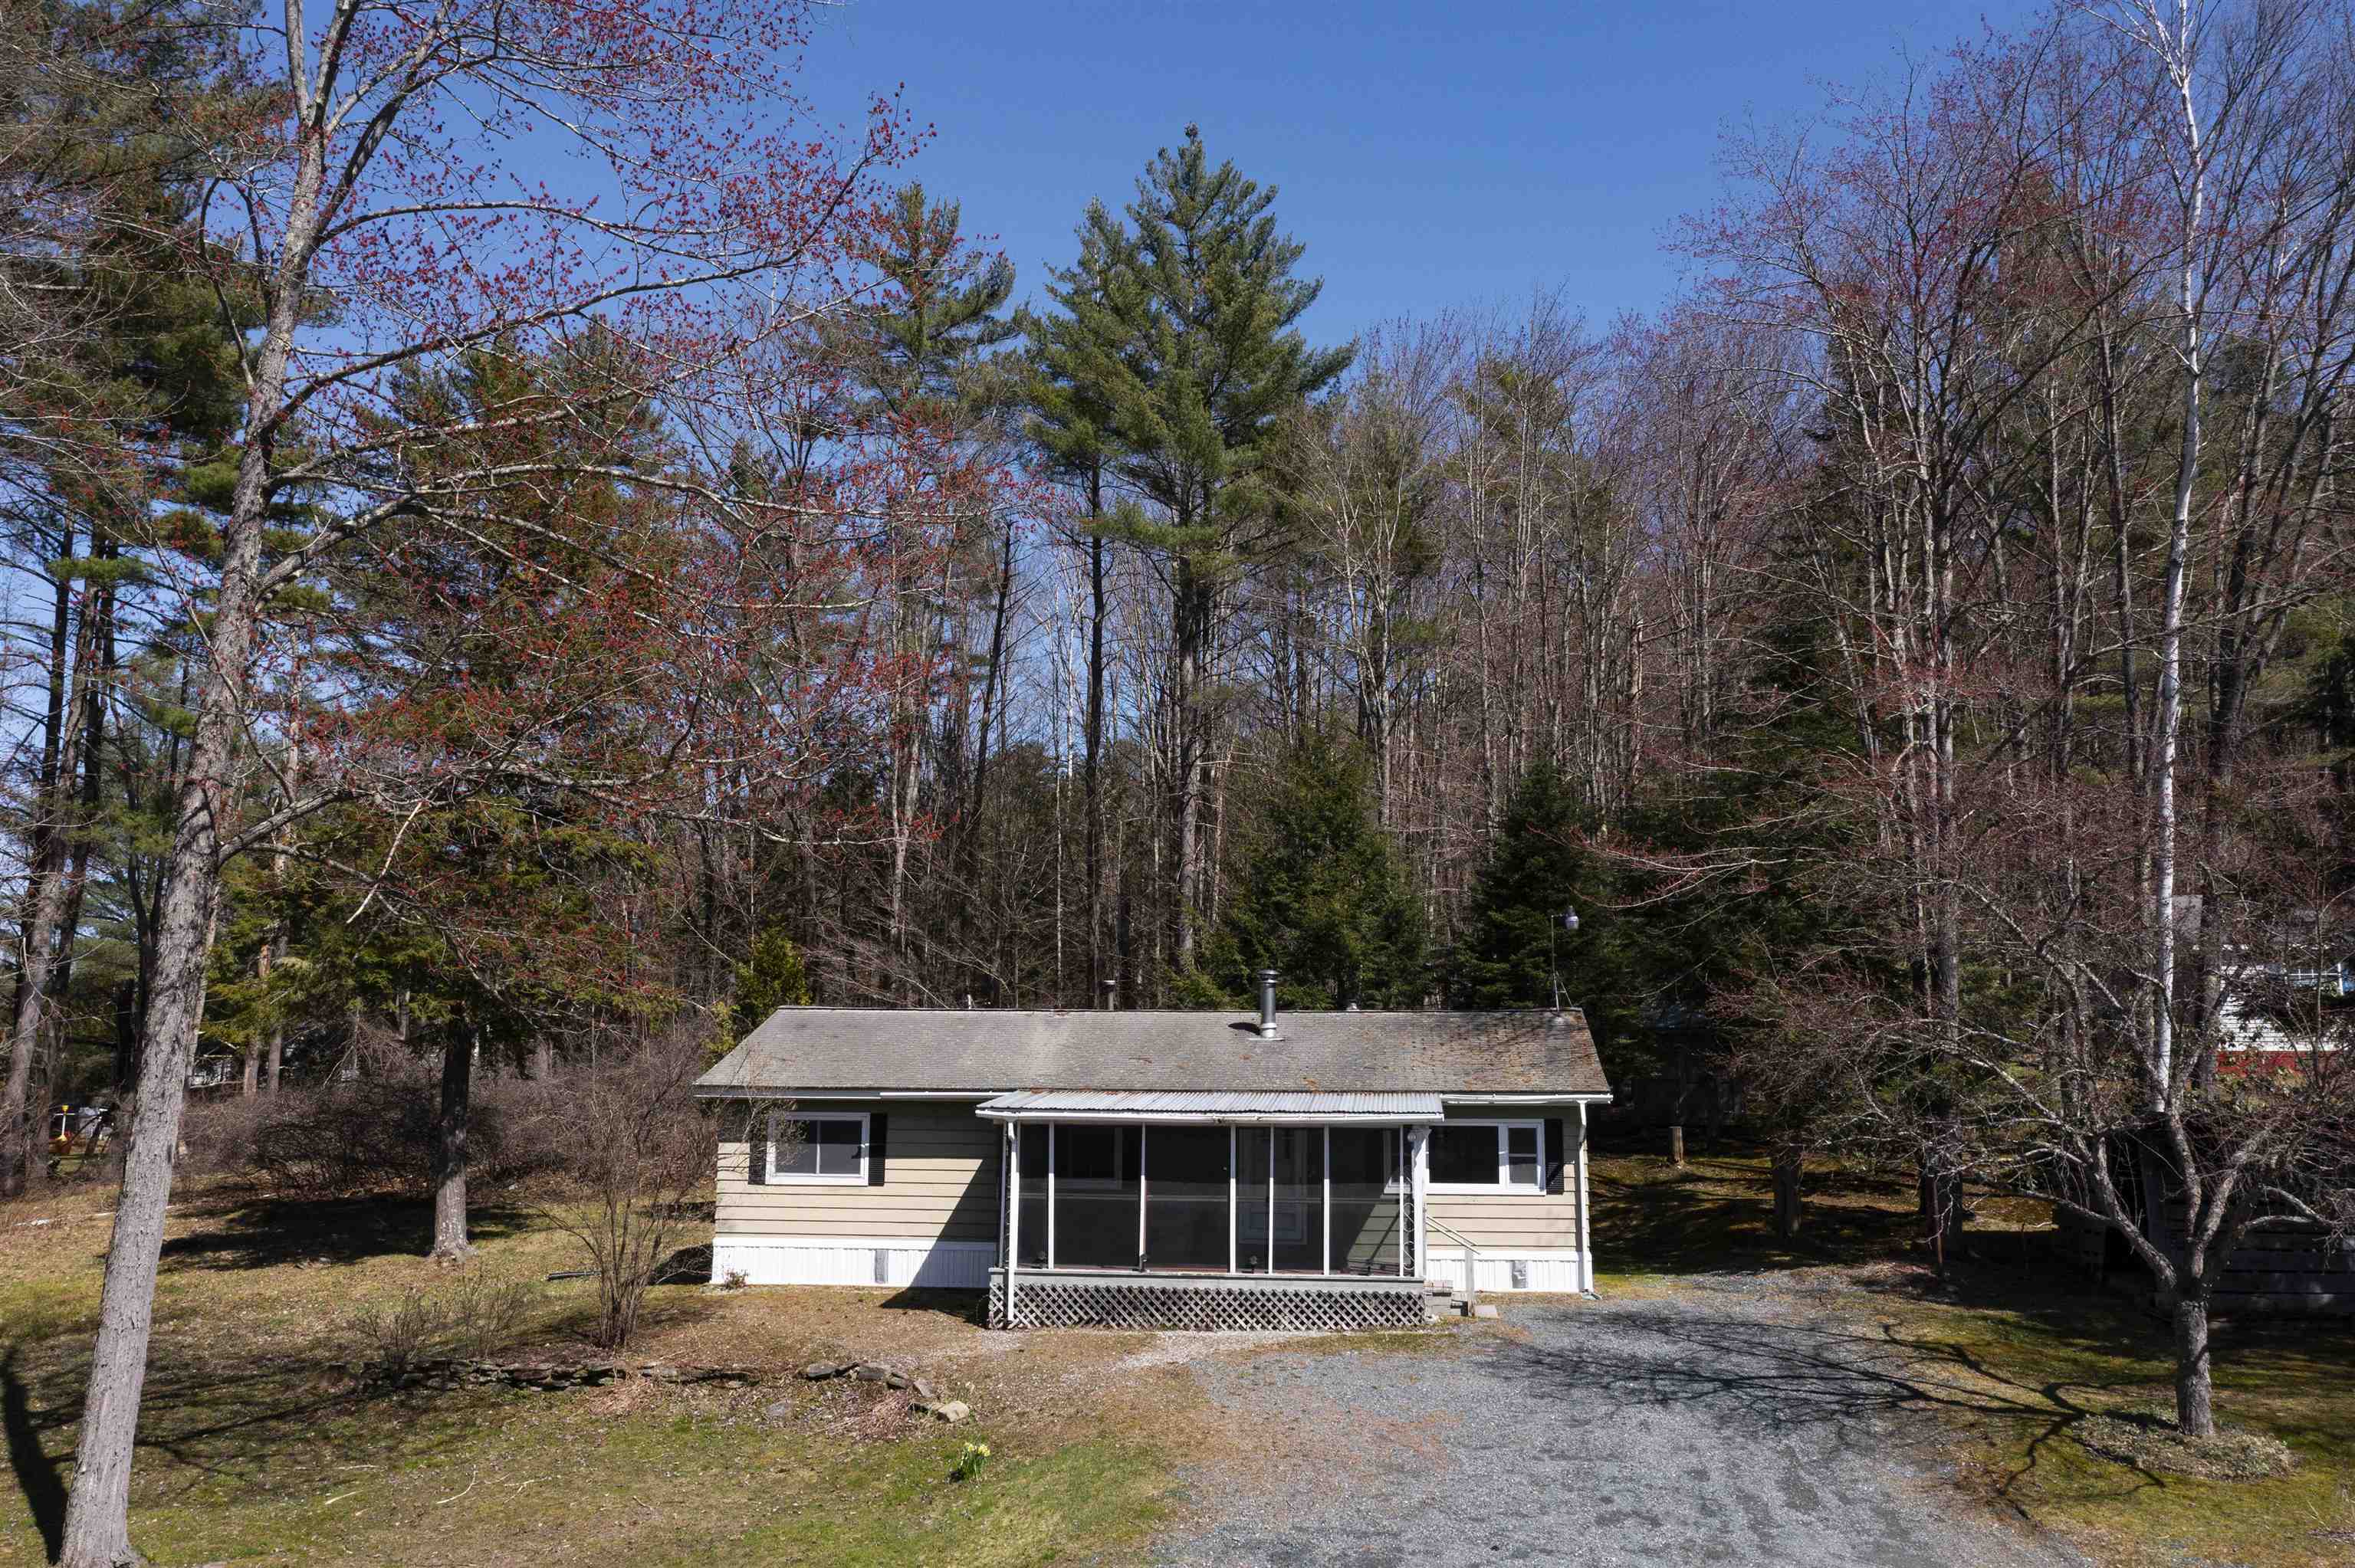 Quechee Mobile-Manufacured Home for sale $249,000